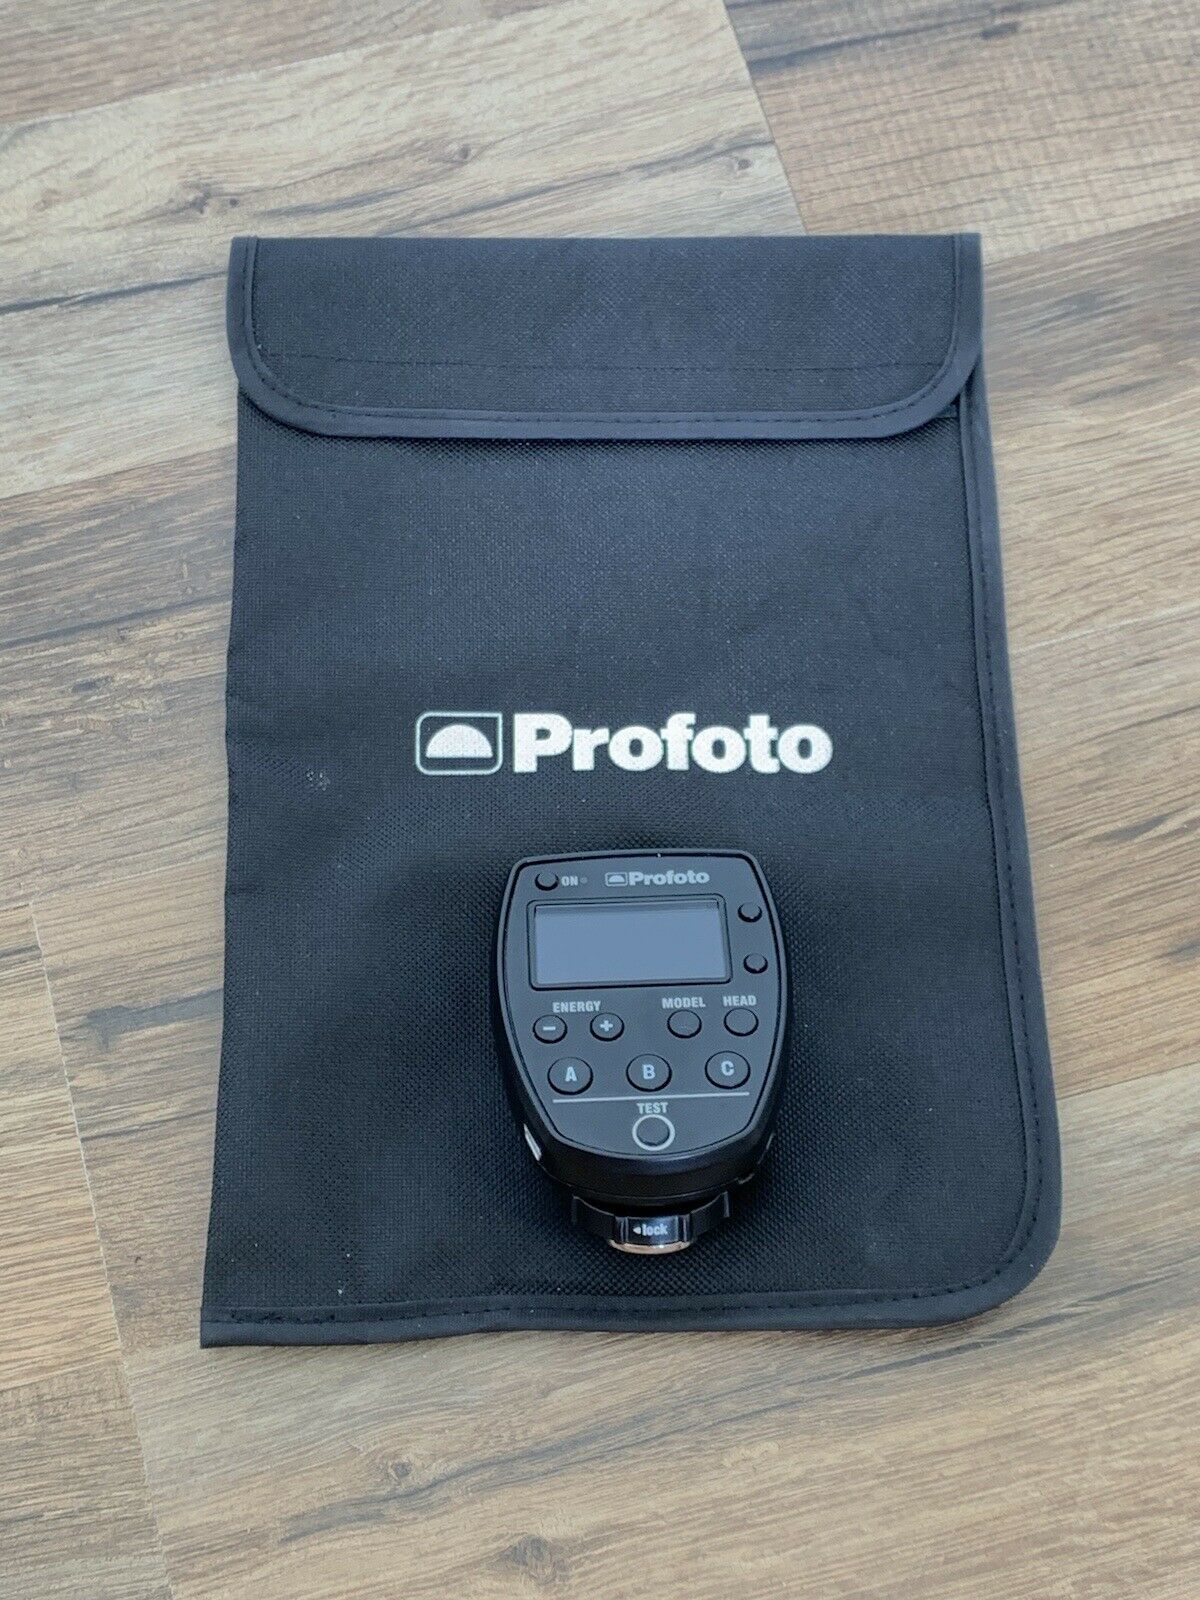 Profoto Ttl-n Air Remote With Case - For Nikon Cameras. In Perfect Condition.